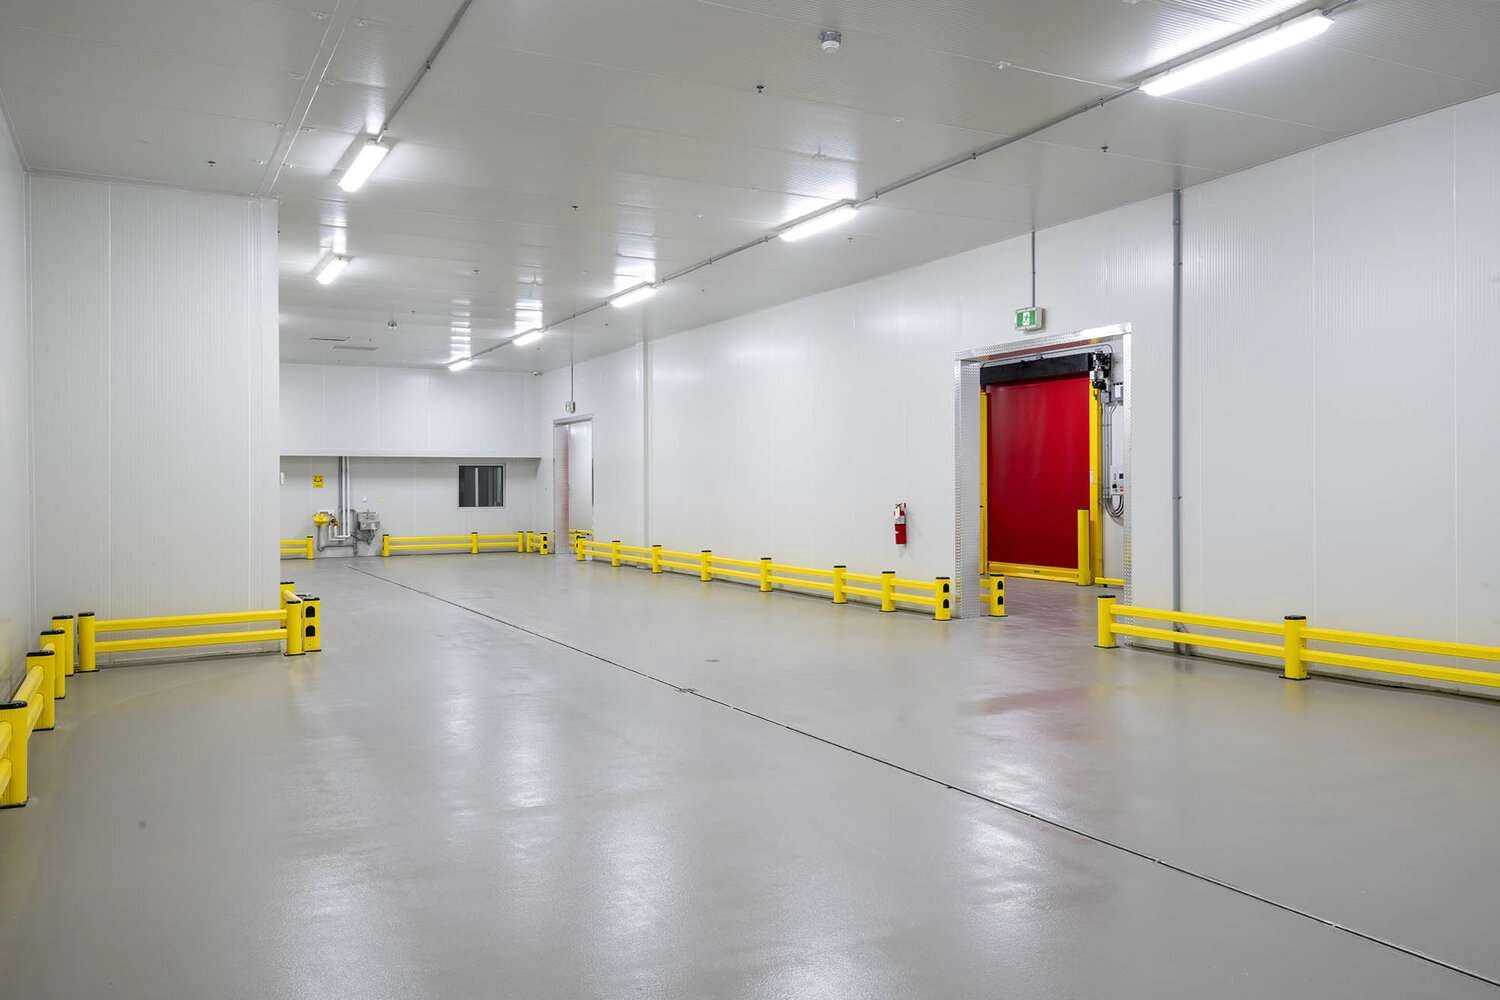 The image is of a cold storage warehouse interior. The warehouse is large and empty, with concrete floors and white walls.  